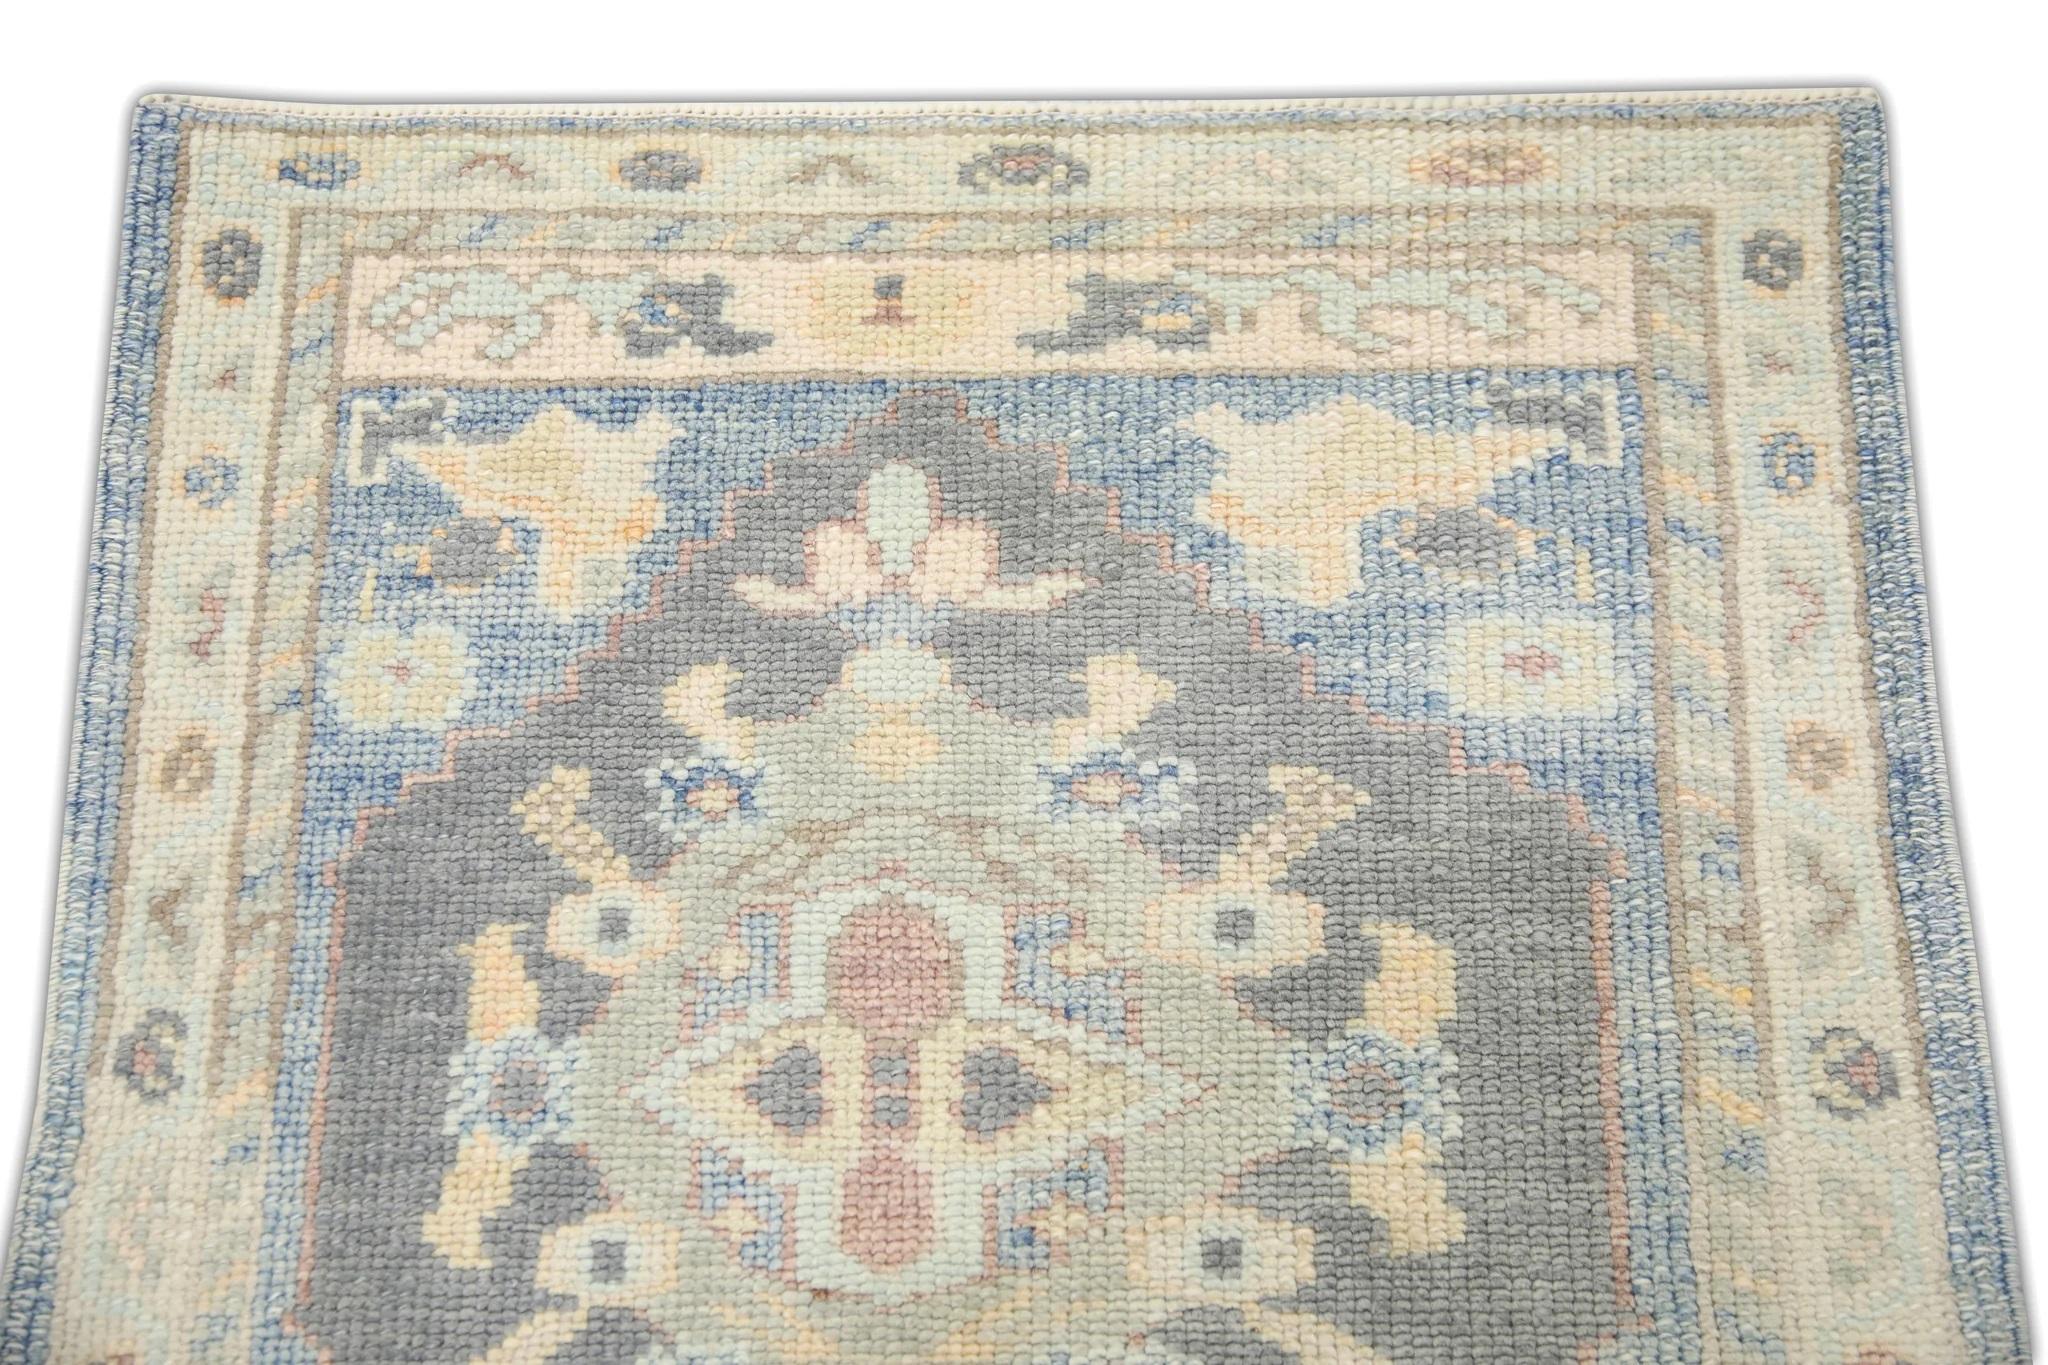 Hand-Woven Blue Multicolor Floral Handwoven Wool Turkish Oushak Rug 2'4